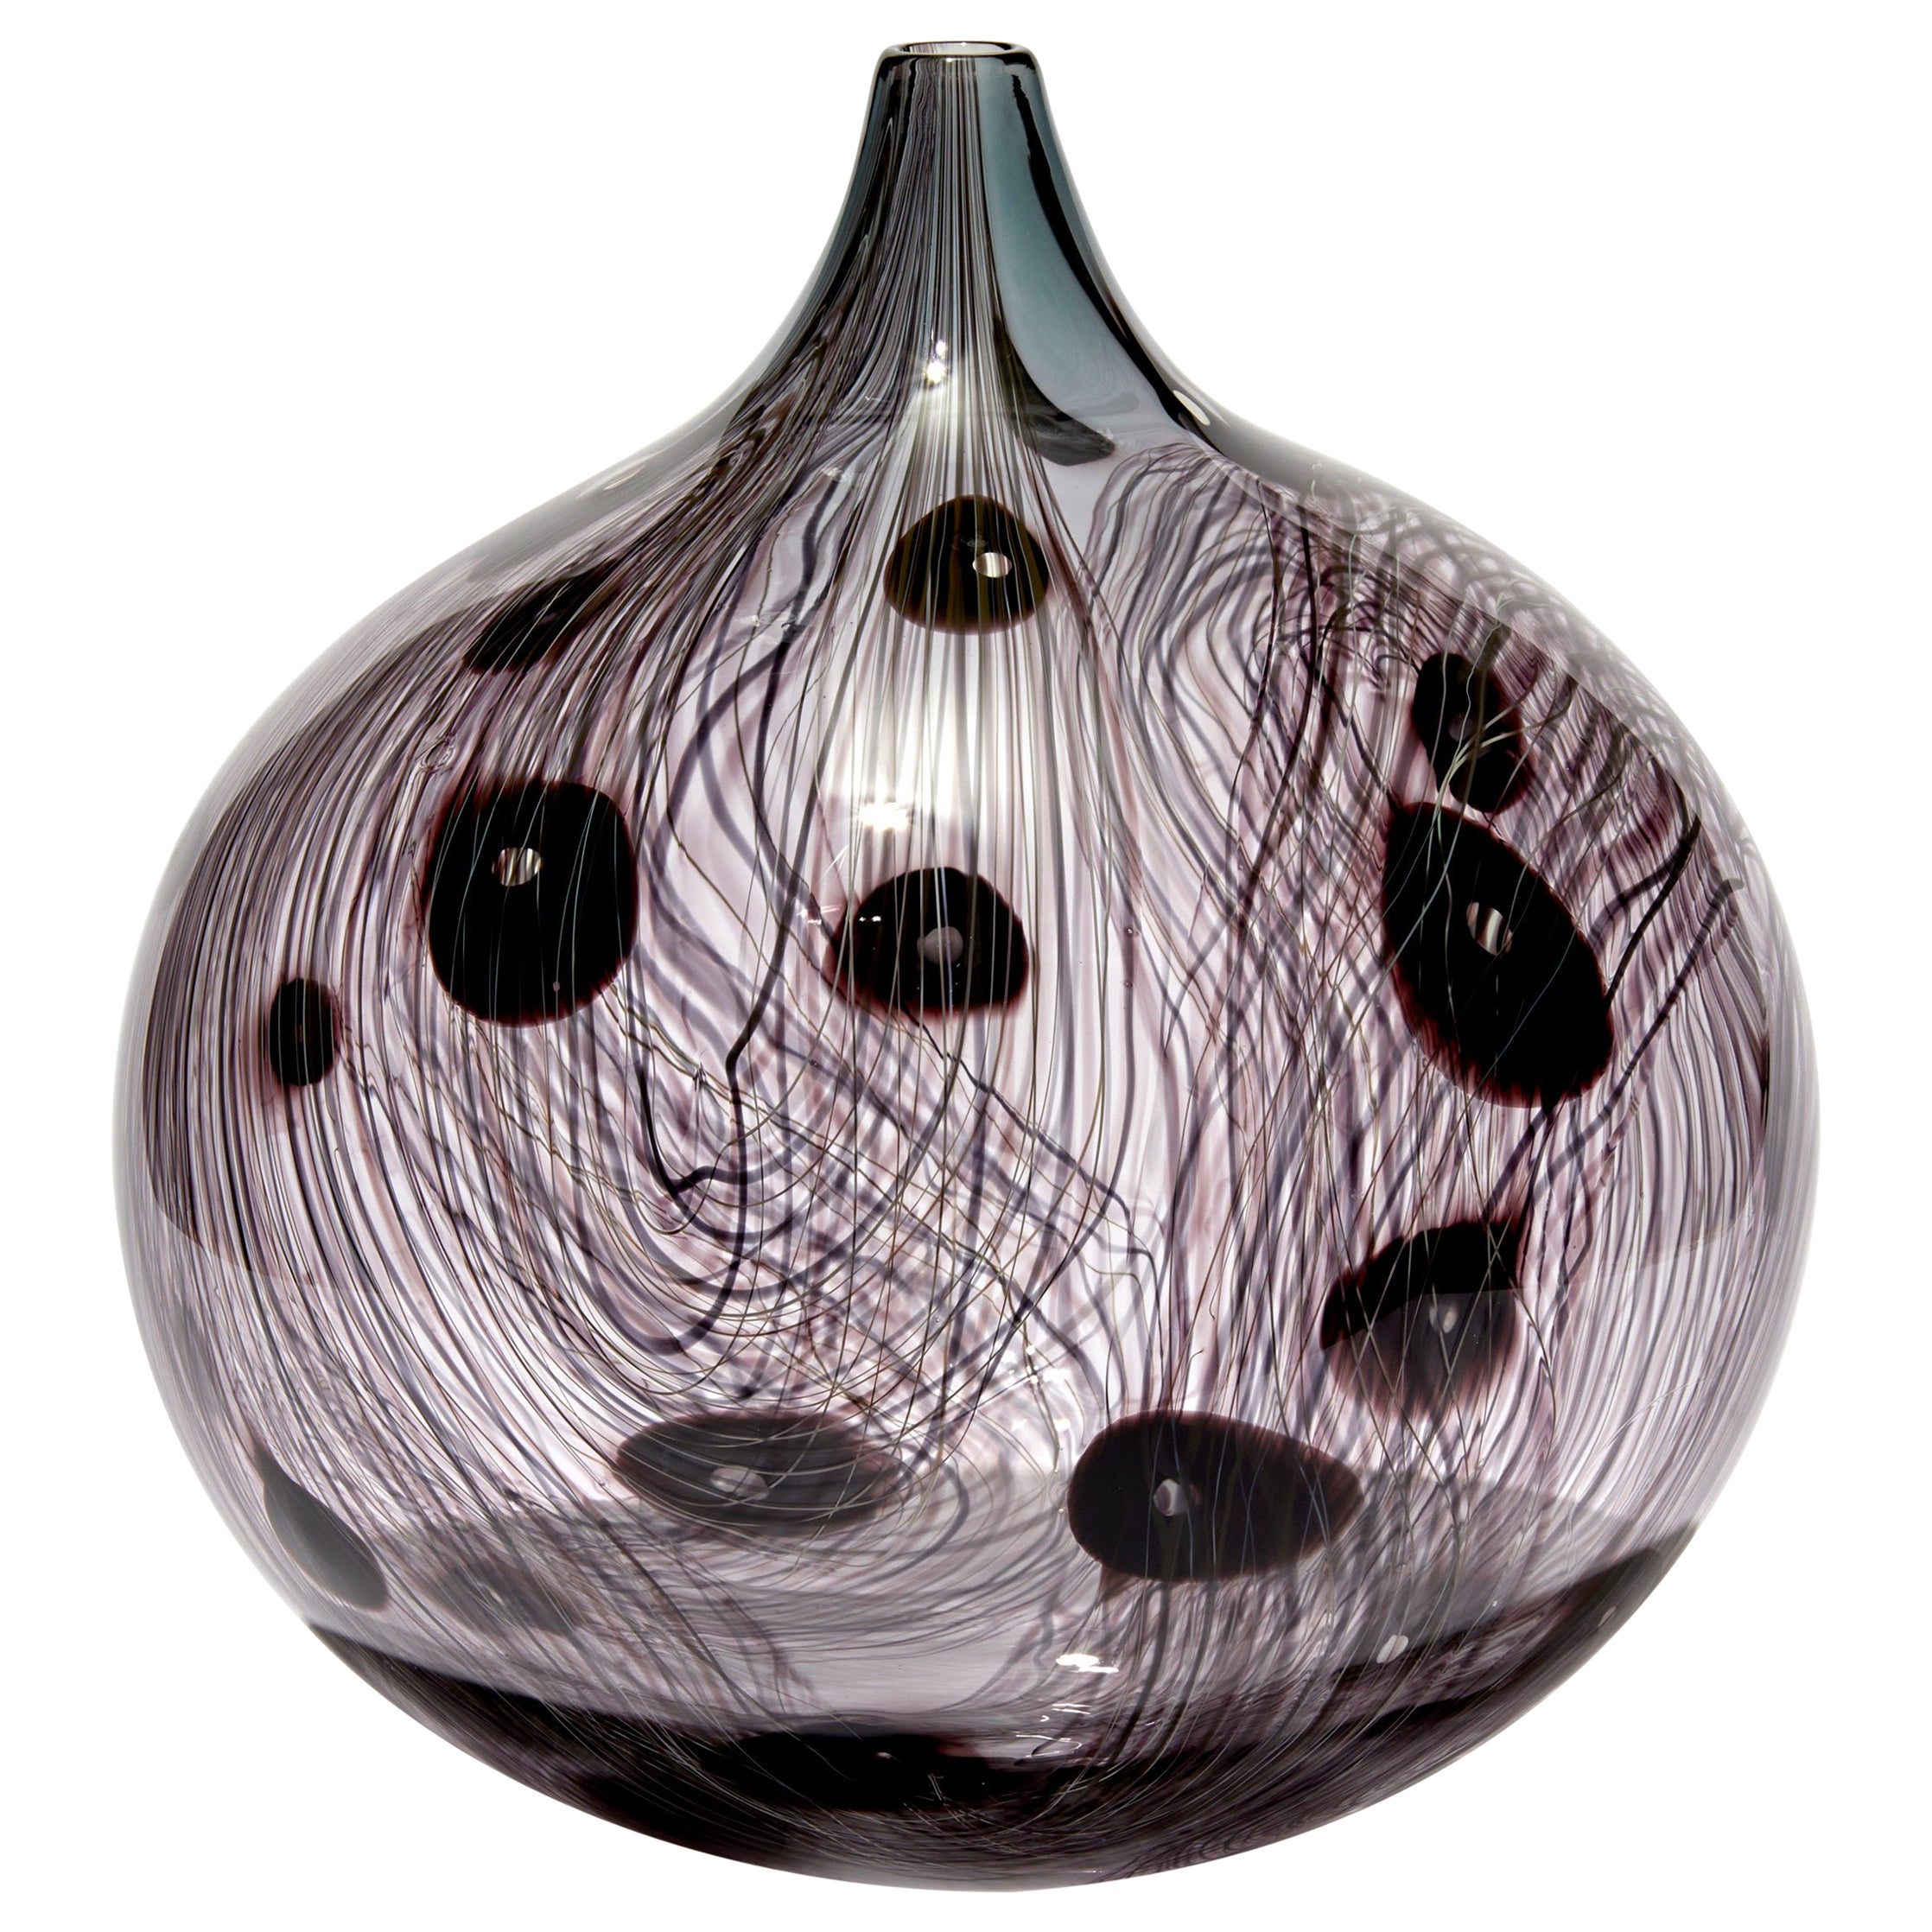 Rings v, Clear & Dark Aubergine / Purple Abstract Glass Vessel by Ann Wåhlström For Sale